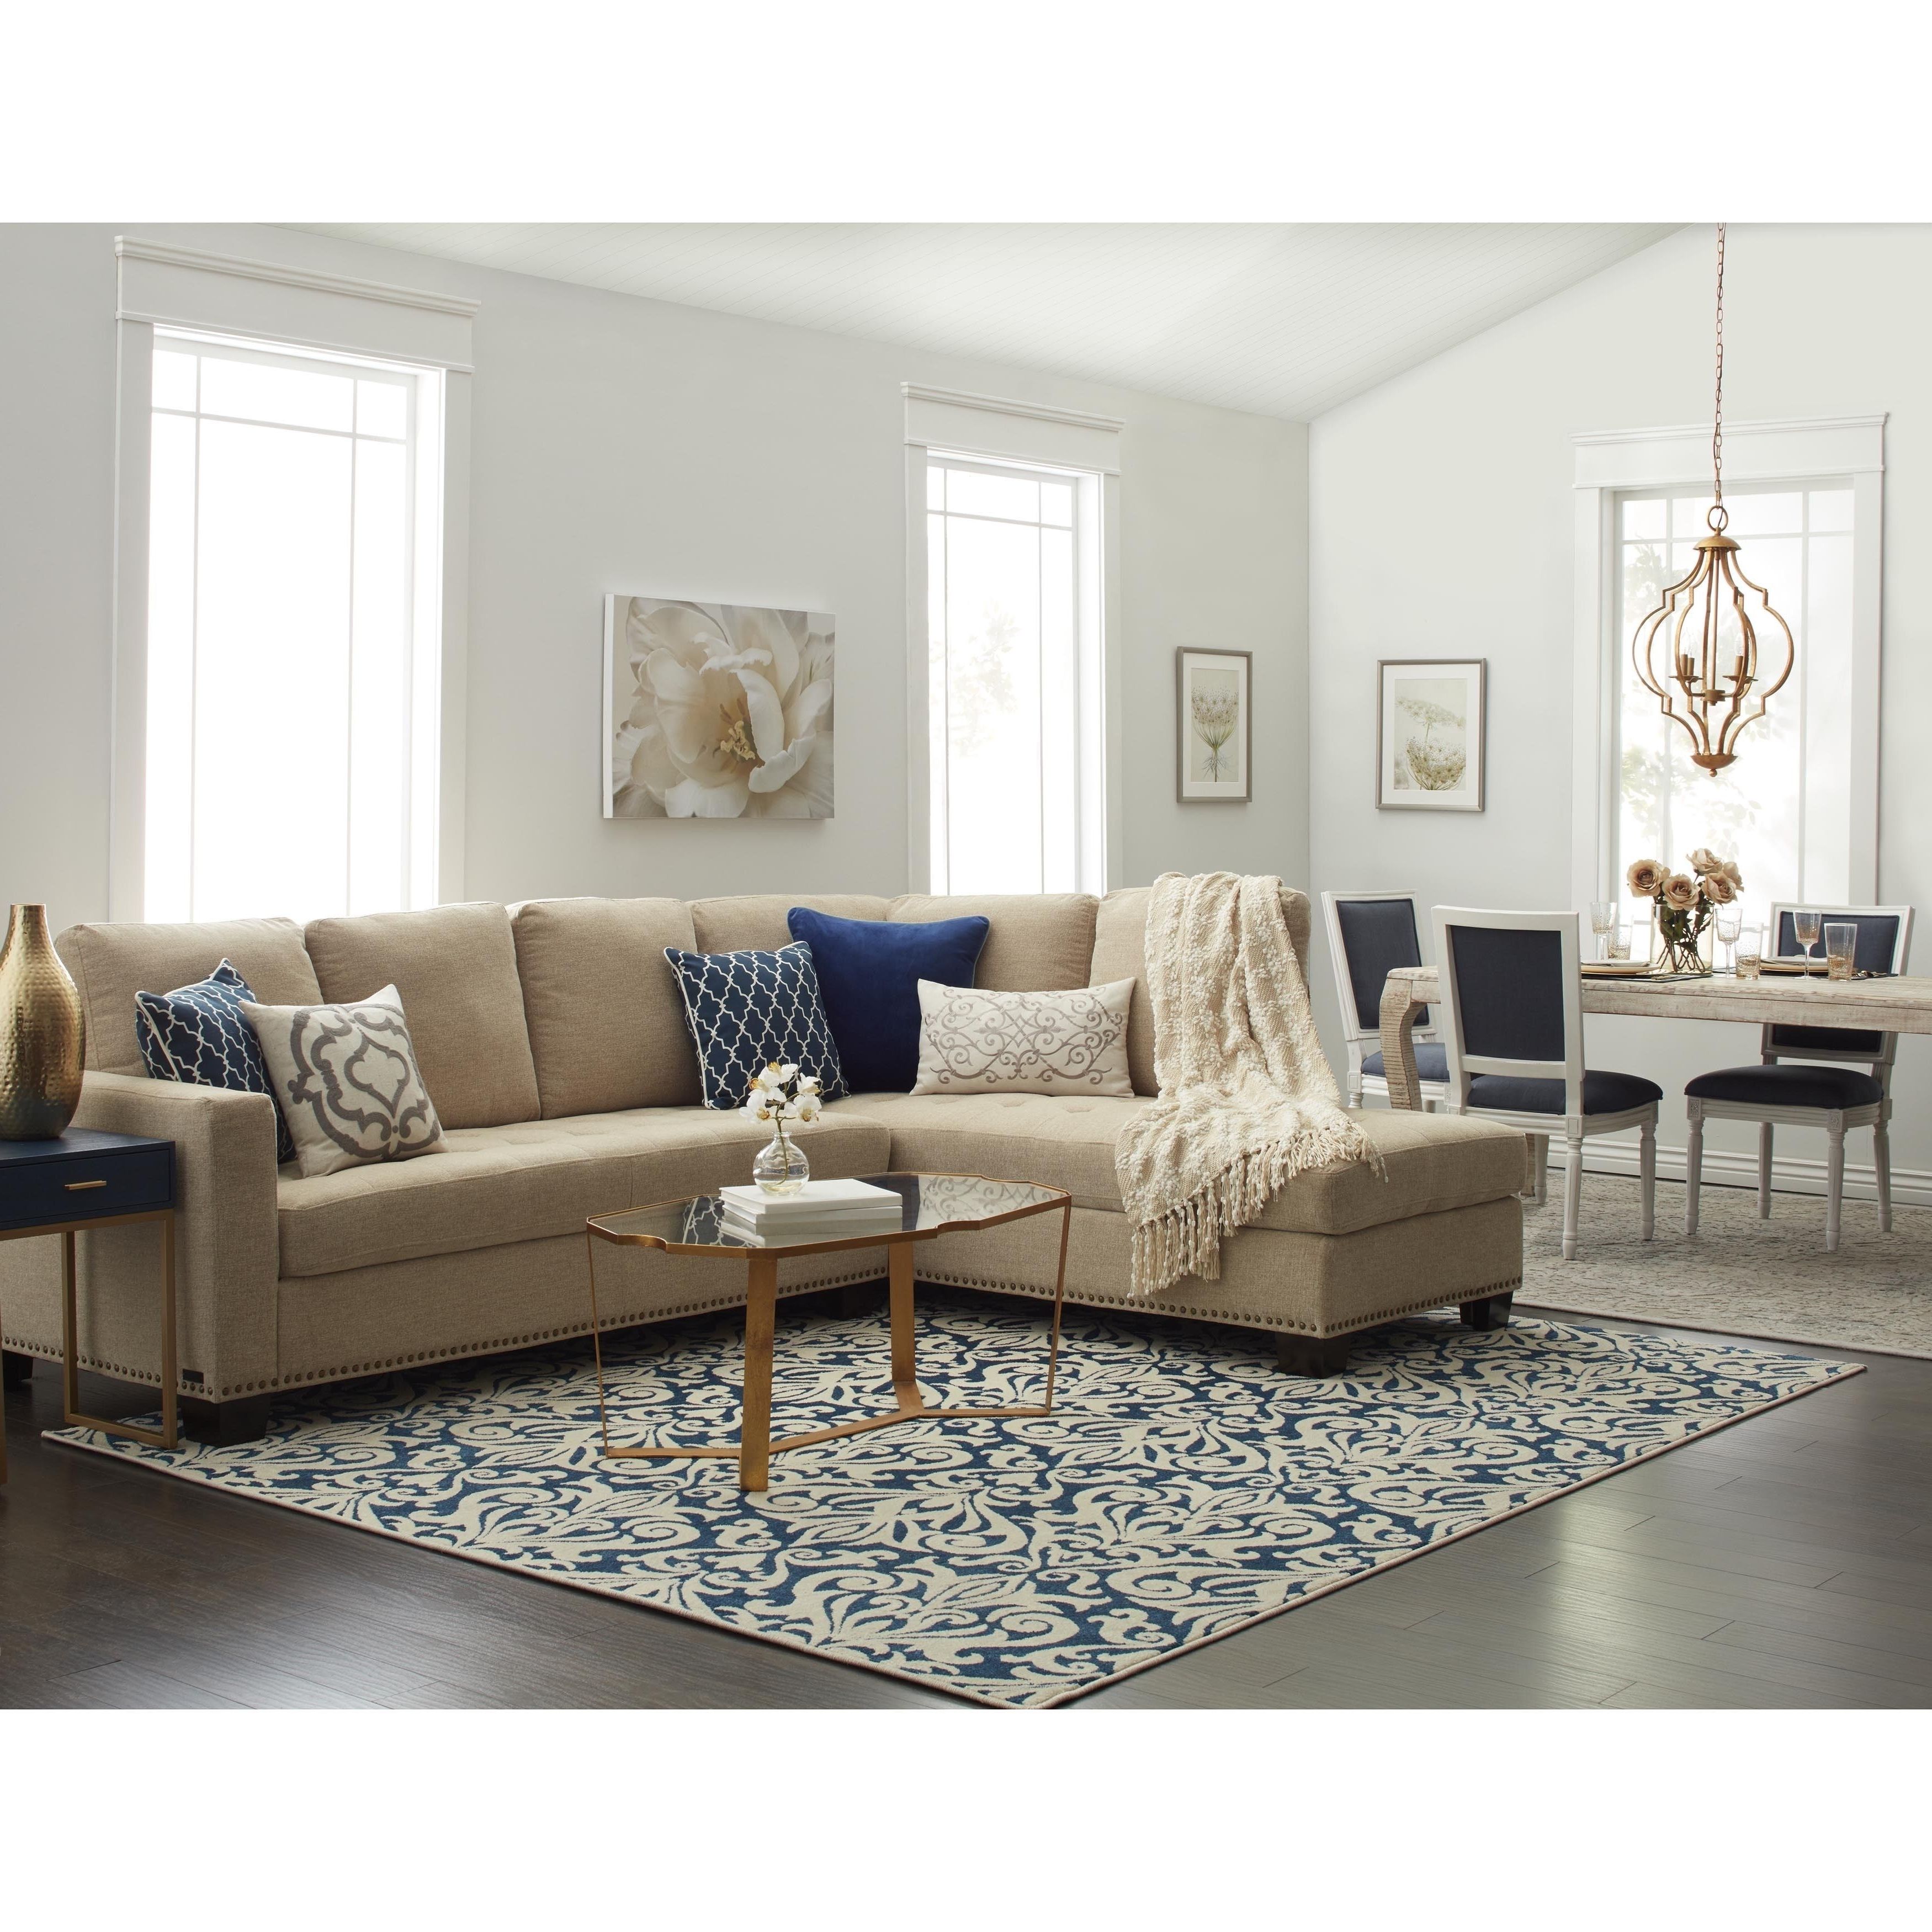 Sectionals Home Goods : Free Shipping On Orders Over $45 At With Most Current Overstock Sectional Sofas (View 1 of 20)